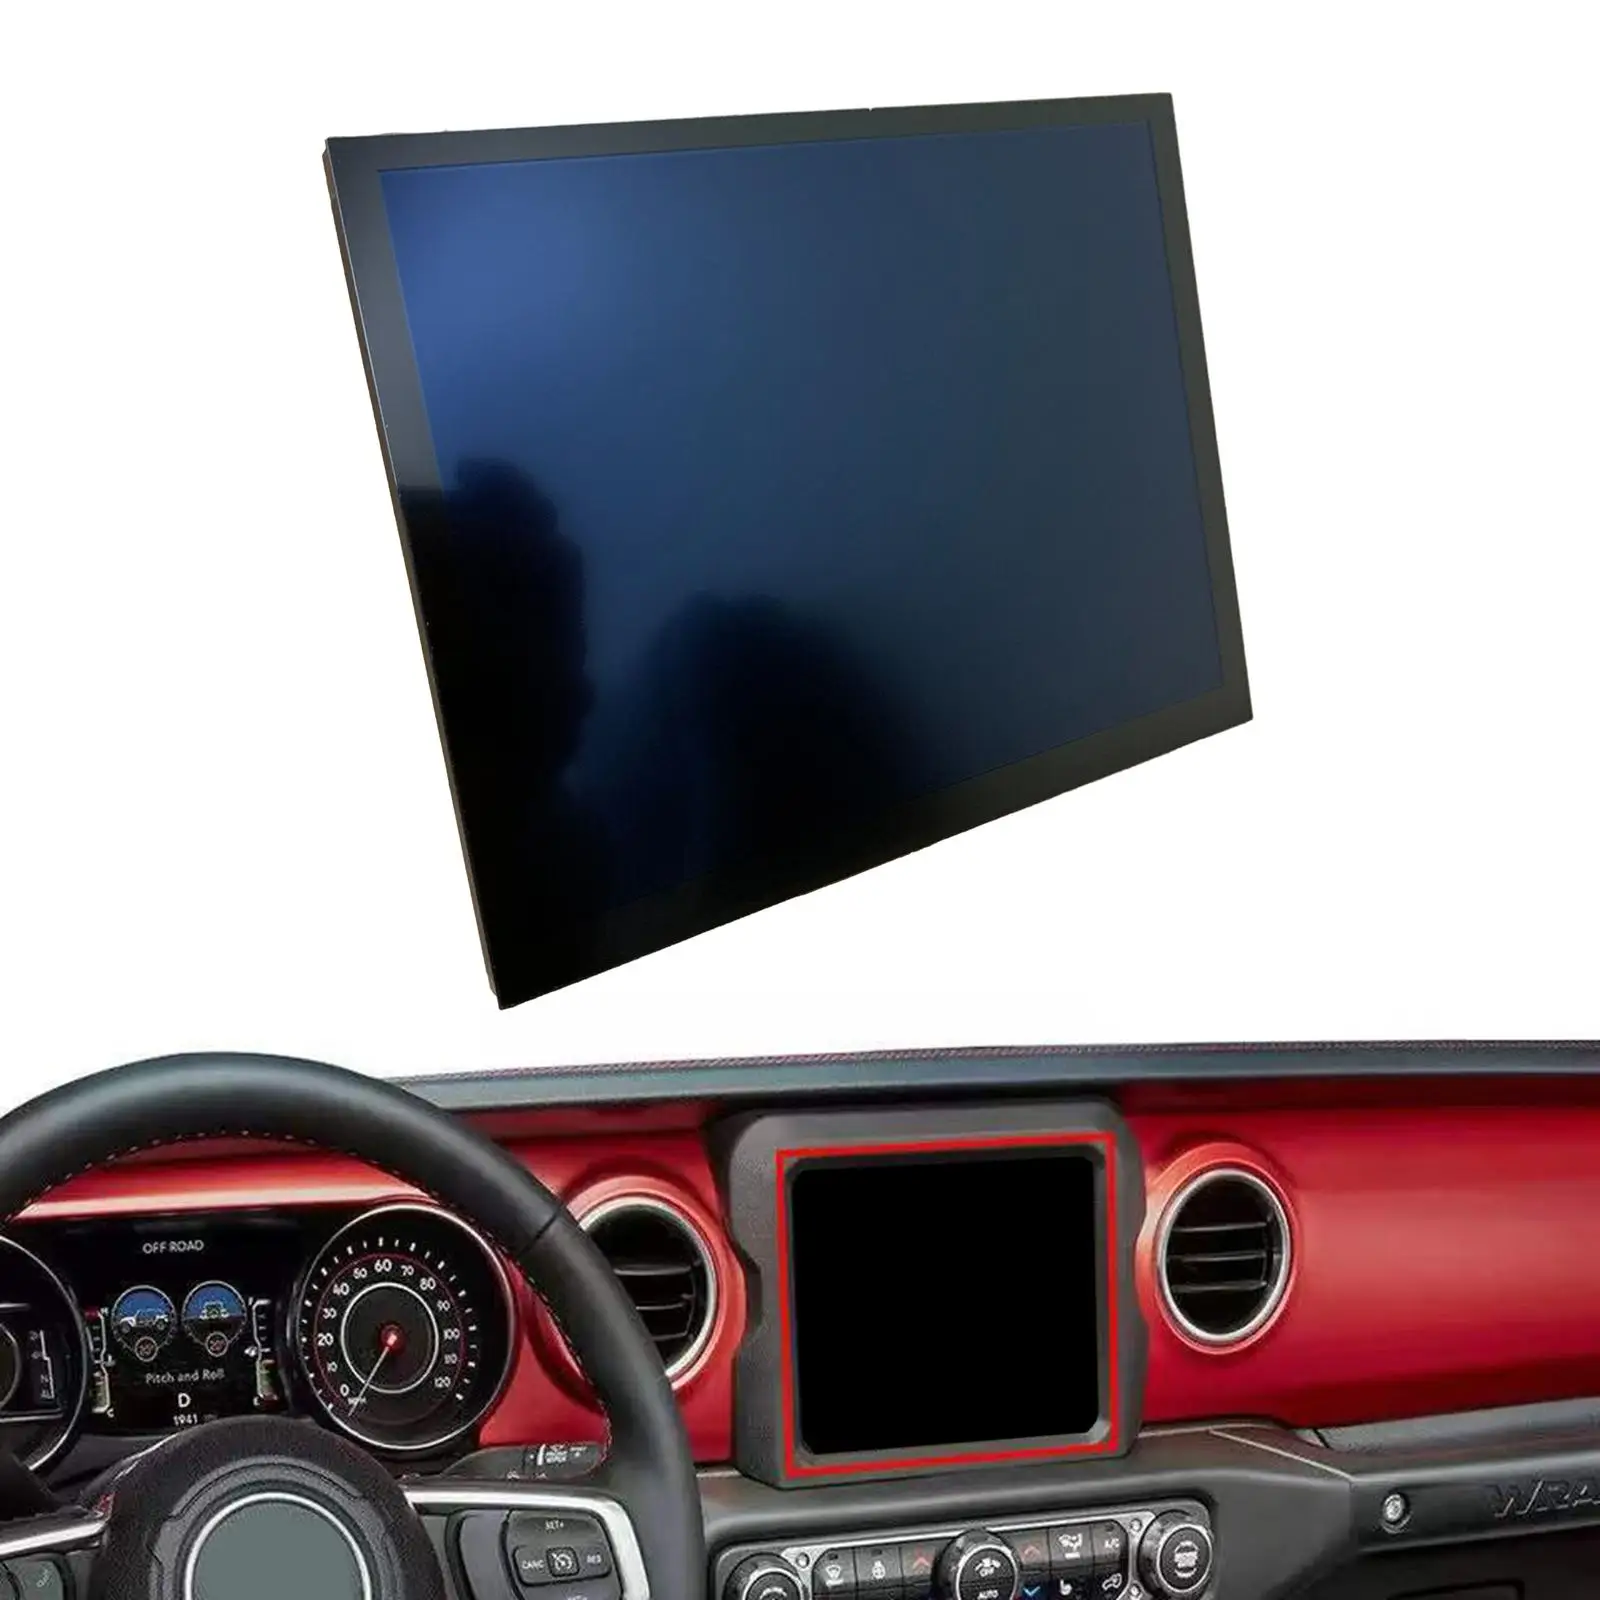 LA084x01(SL)(02) Premium Durable LCD Display Touch Screen Radio Navigation Replaces 8.4